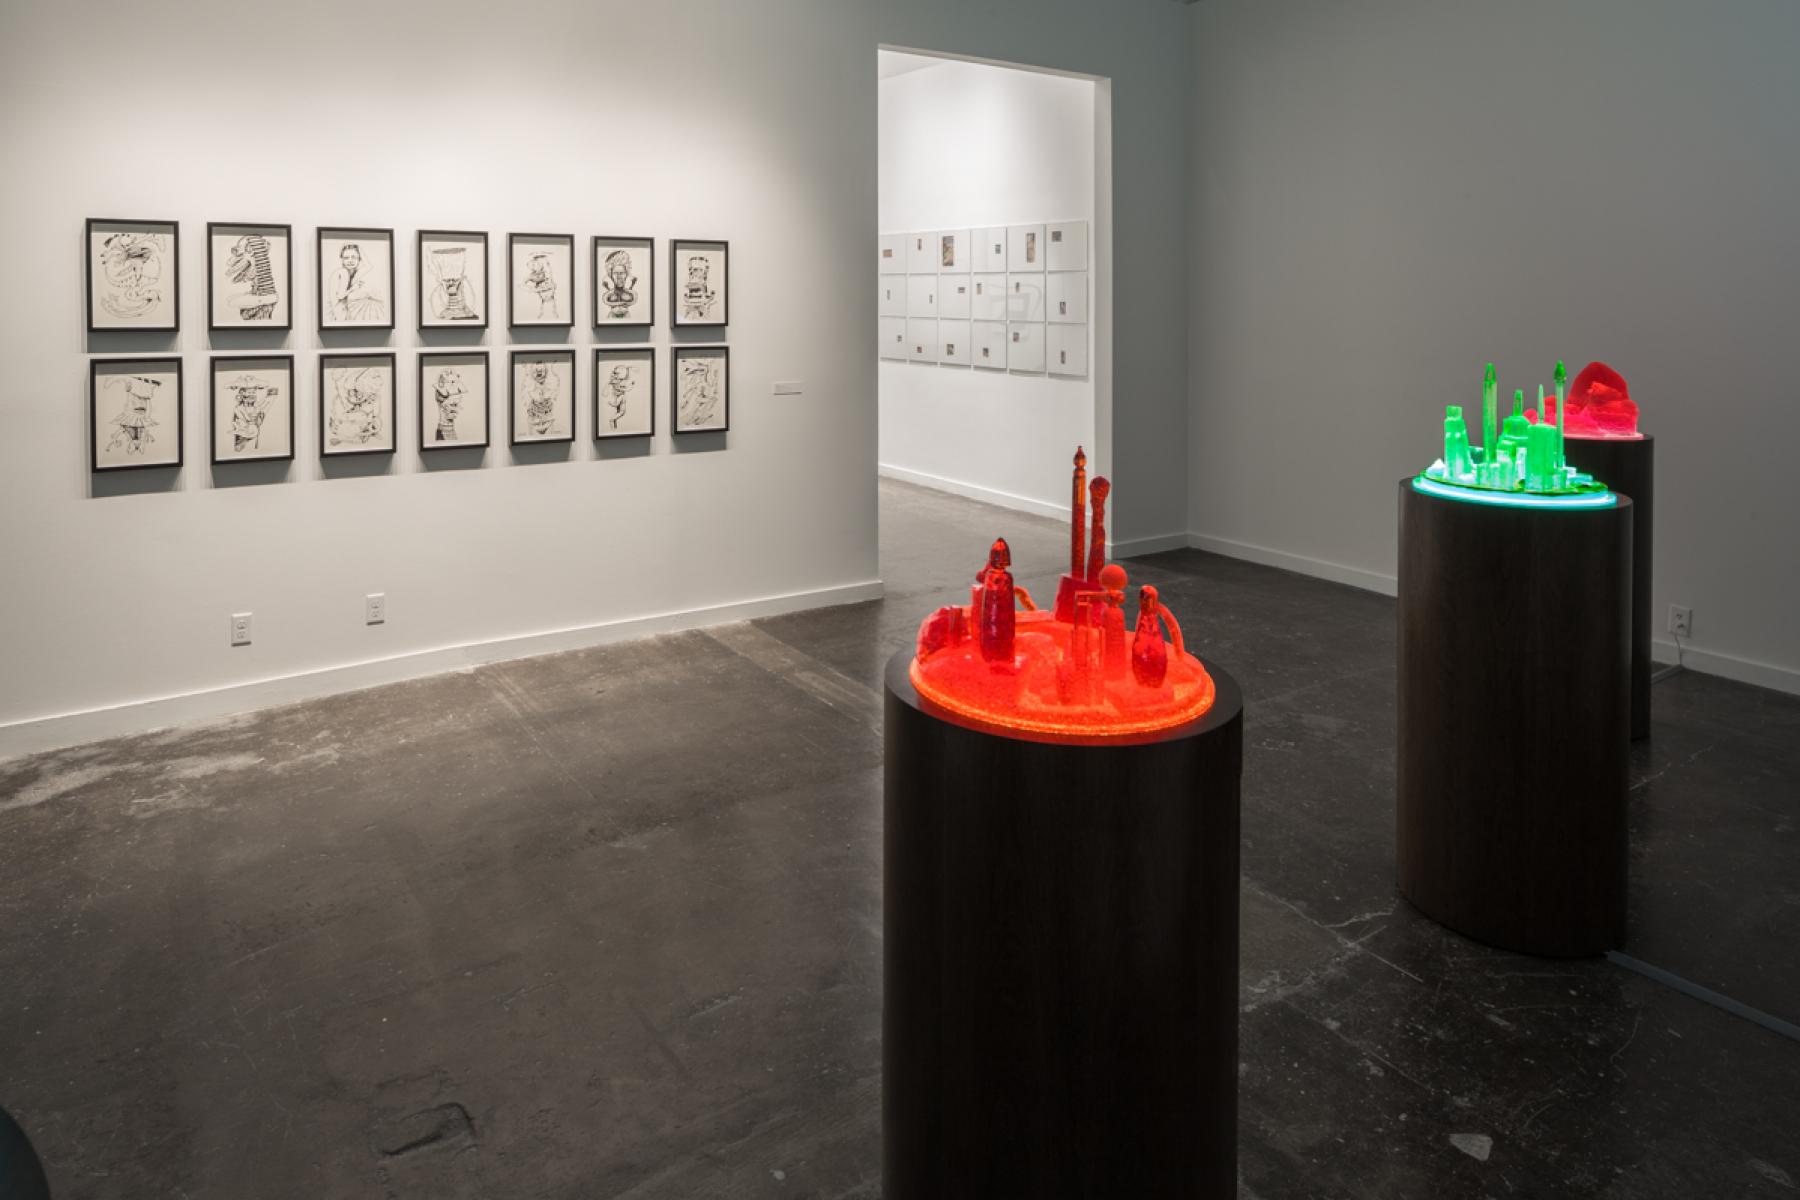 Installation view, South Gallery, featuring work by Mike Kelley, Photography © Fredrik Nilsen